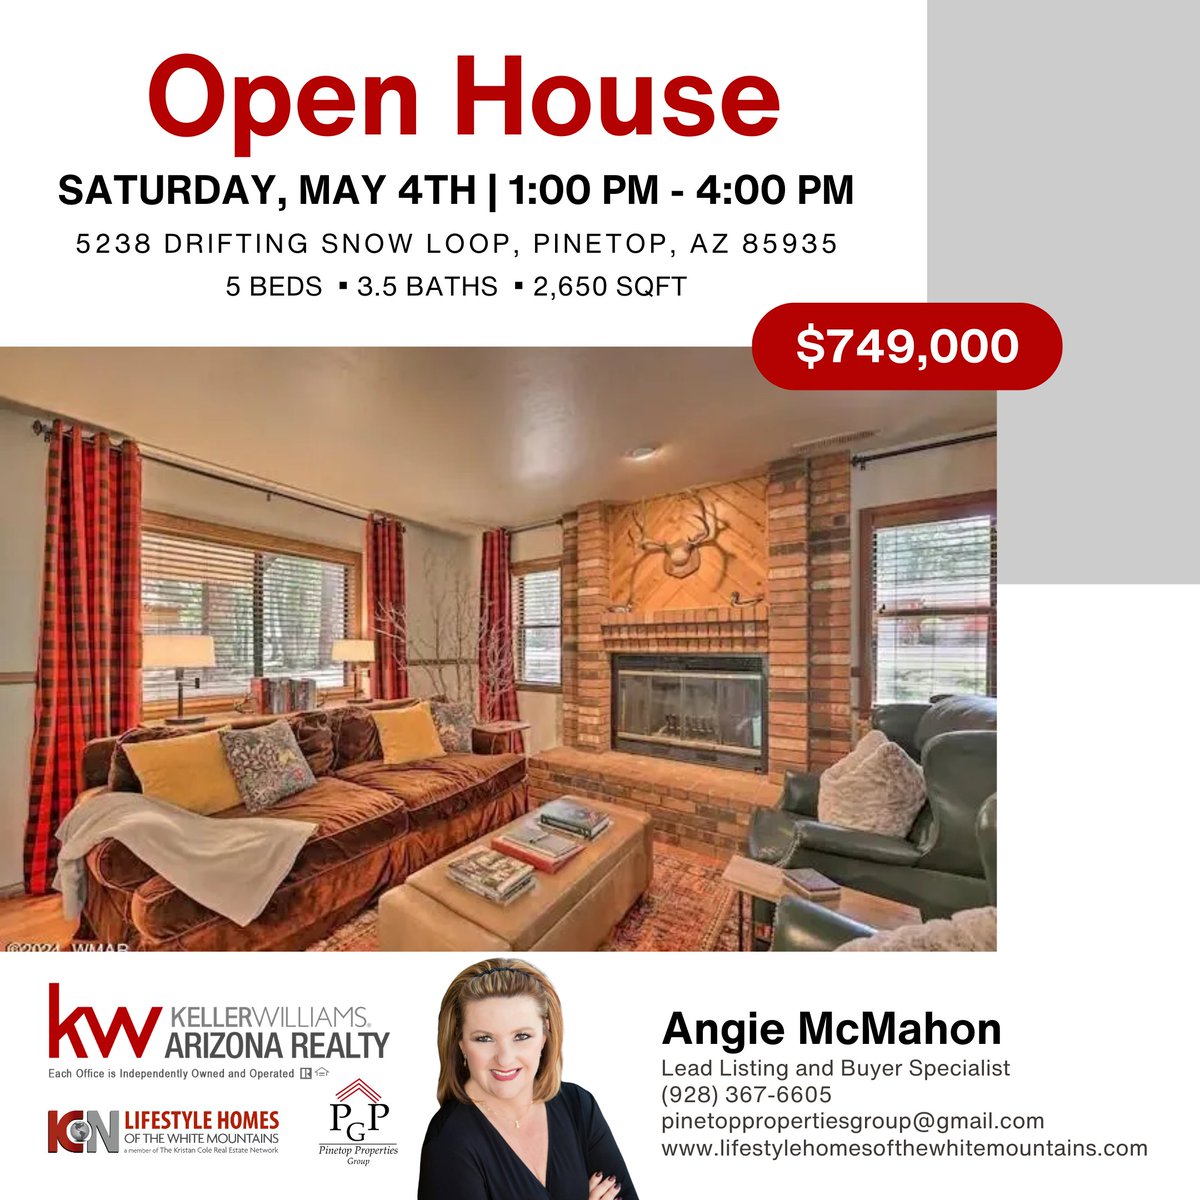 You won’t want to miss this one! A must-see 5-bedroom gem in the pines!

🏡 5238 Drifting Snow Loop, Pinetop, AZ 85935
📆 MAY 4 l SAT l 1PM-4PM

Listed by Angie McMahon, KW AZ Realty
☎️ (928) 3676605
📧 pinetoppropertiesgroup@gmail.com
👉 tinyurl.com/mtvt9kuf

#homeinvestment